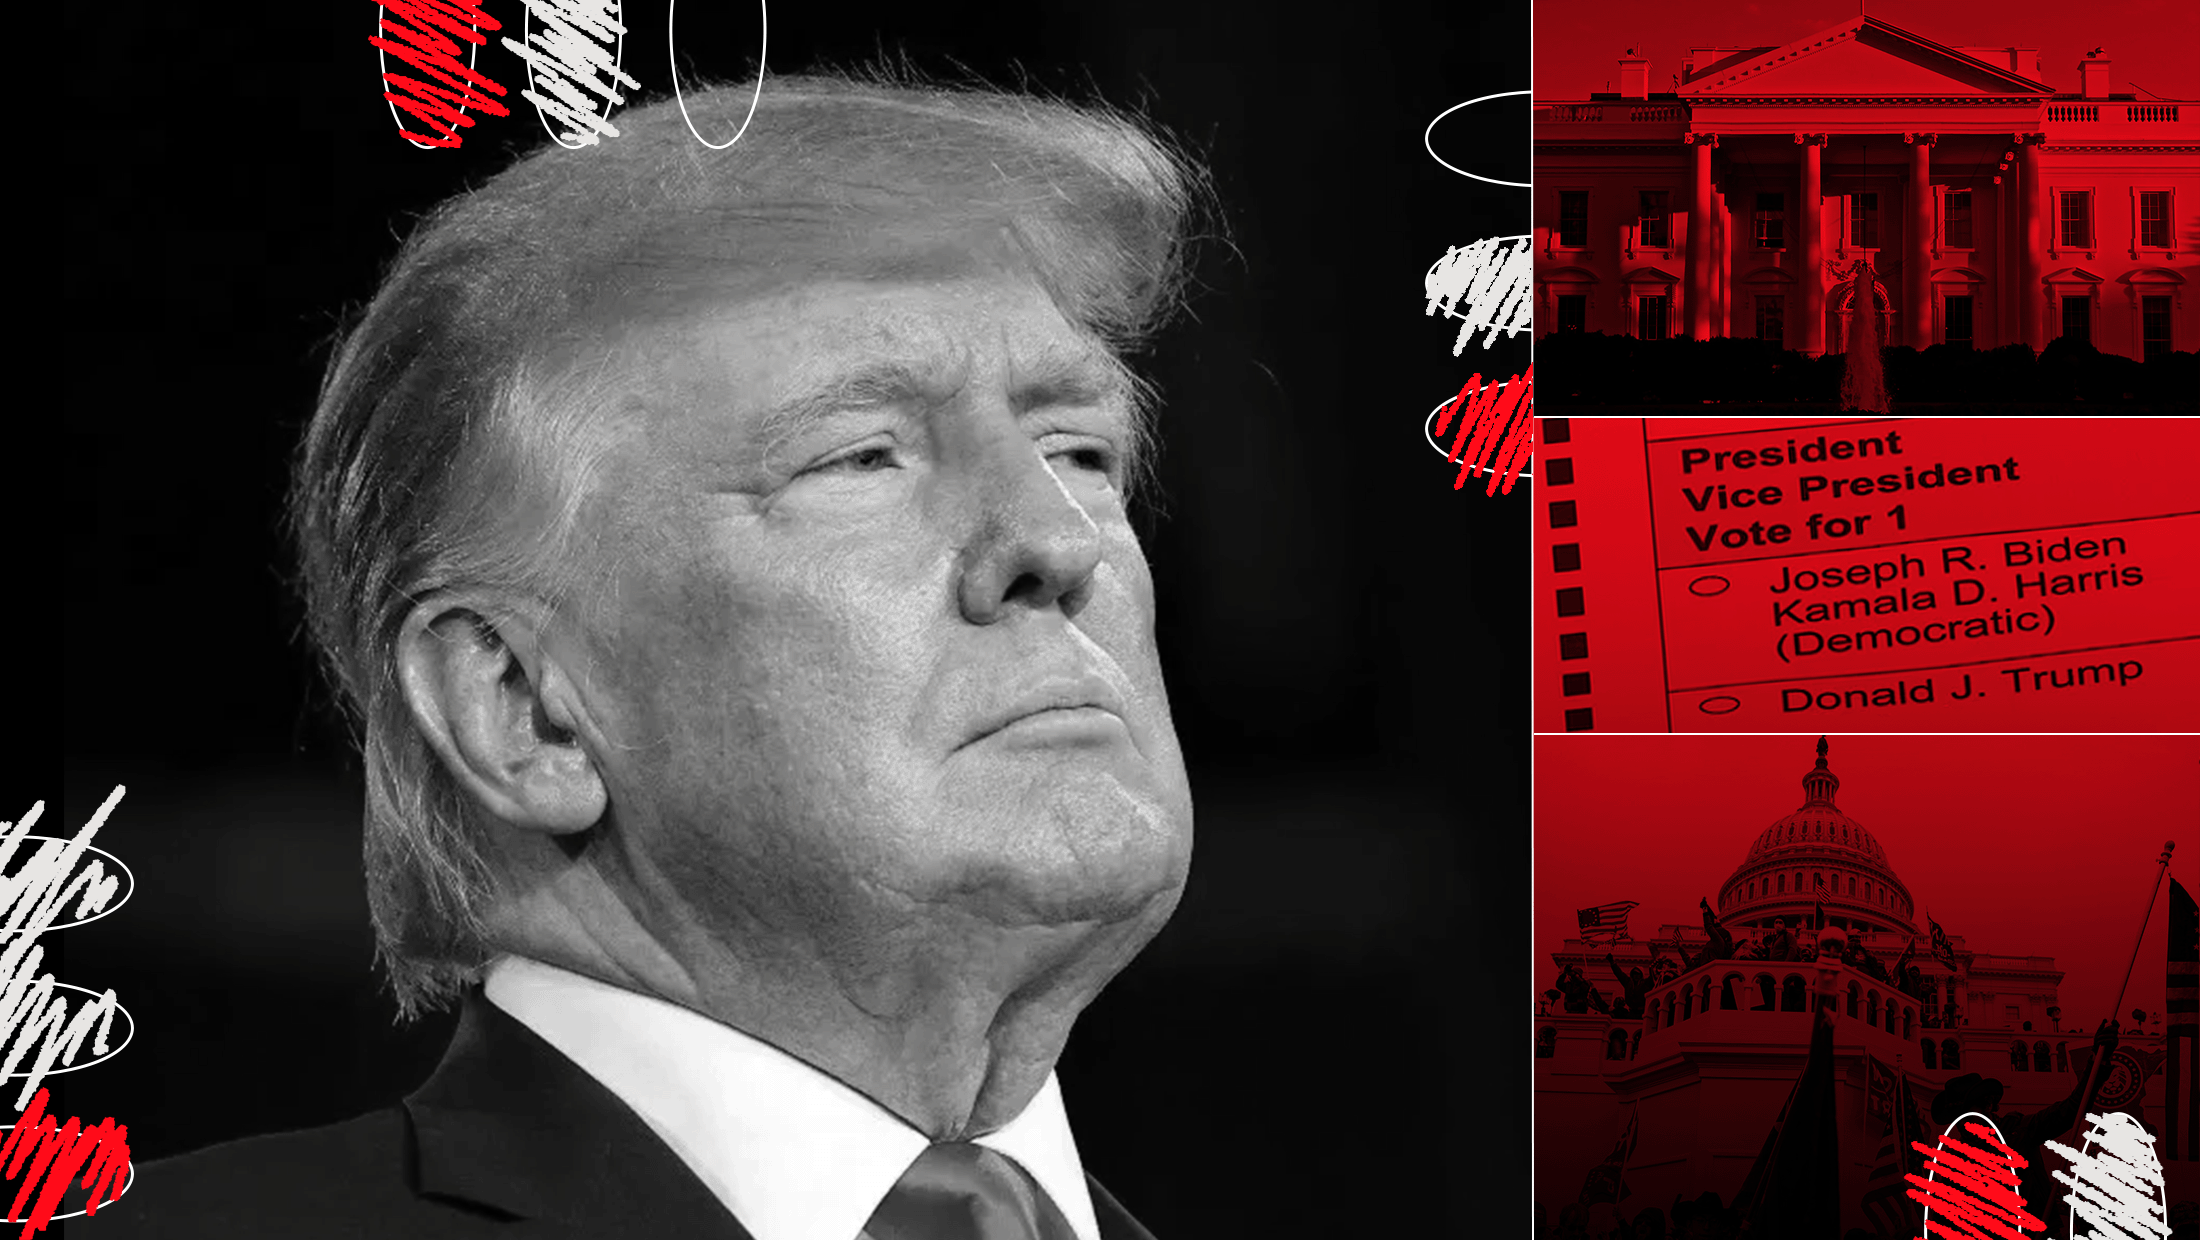 Black and red background with image of former President Donald Trump on the left-hand side and on the right-hand side, a vertical three-panel compilation of images of the White House, a ballot with Biden and Trump on it and imagery from the Jan. 6 insurrection.